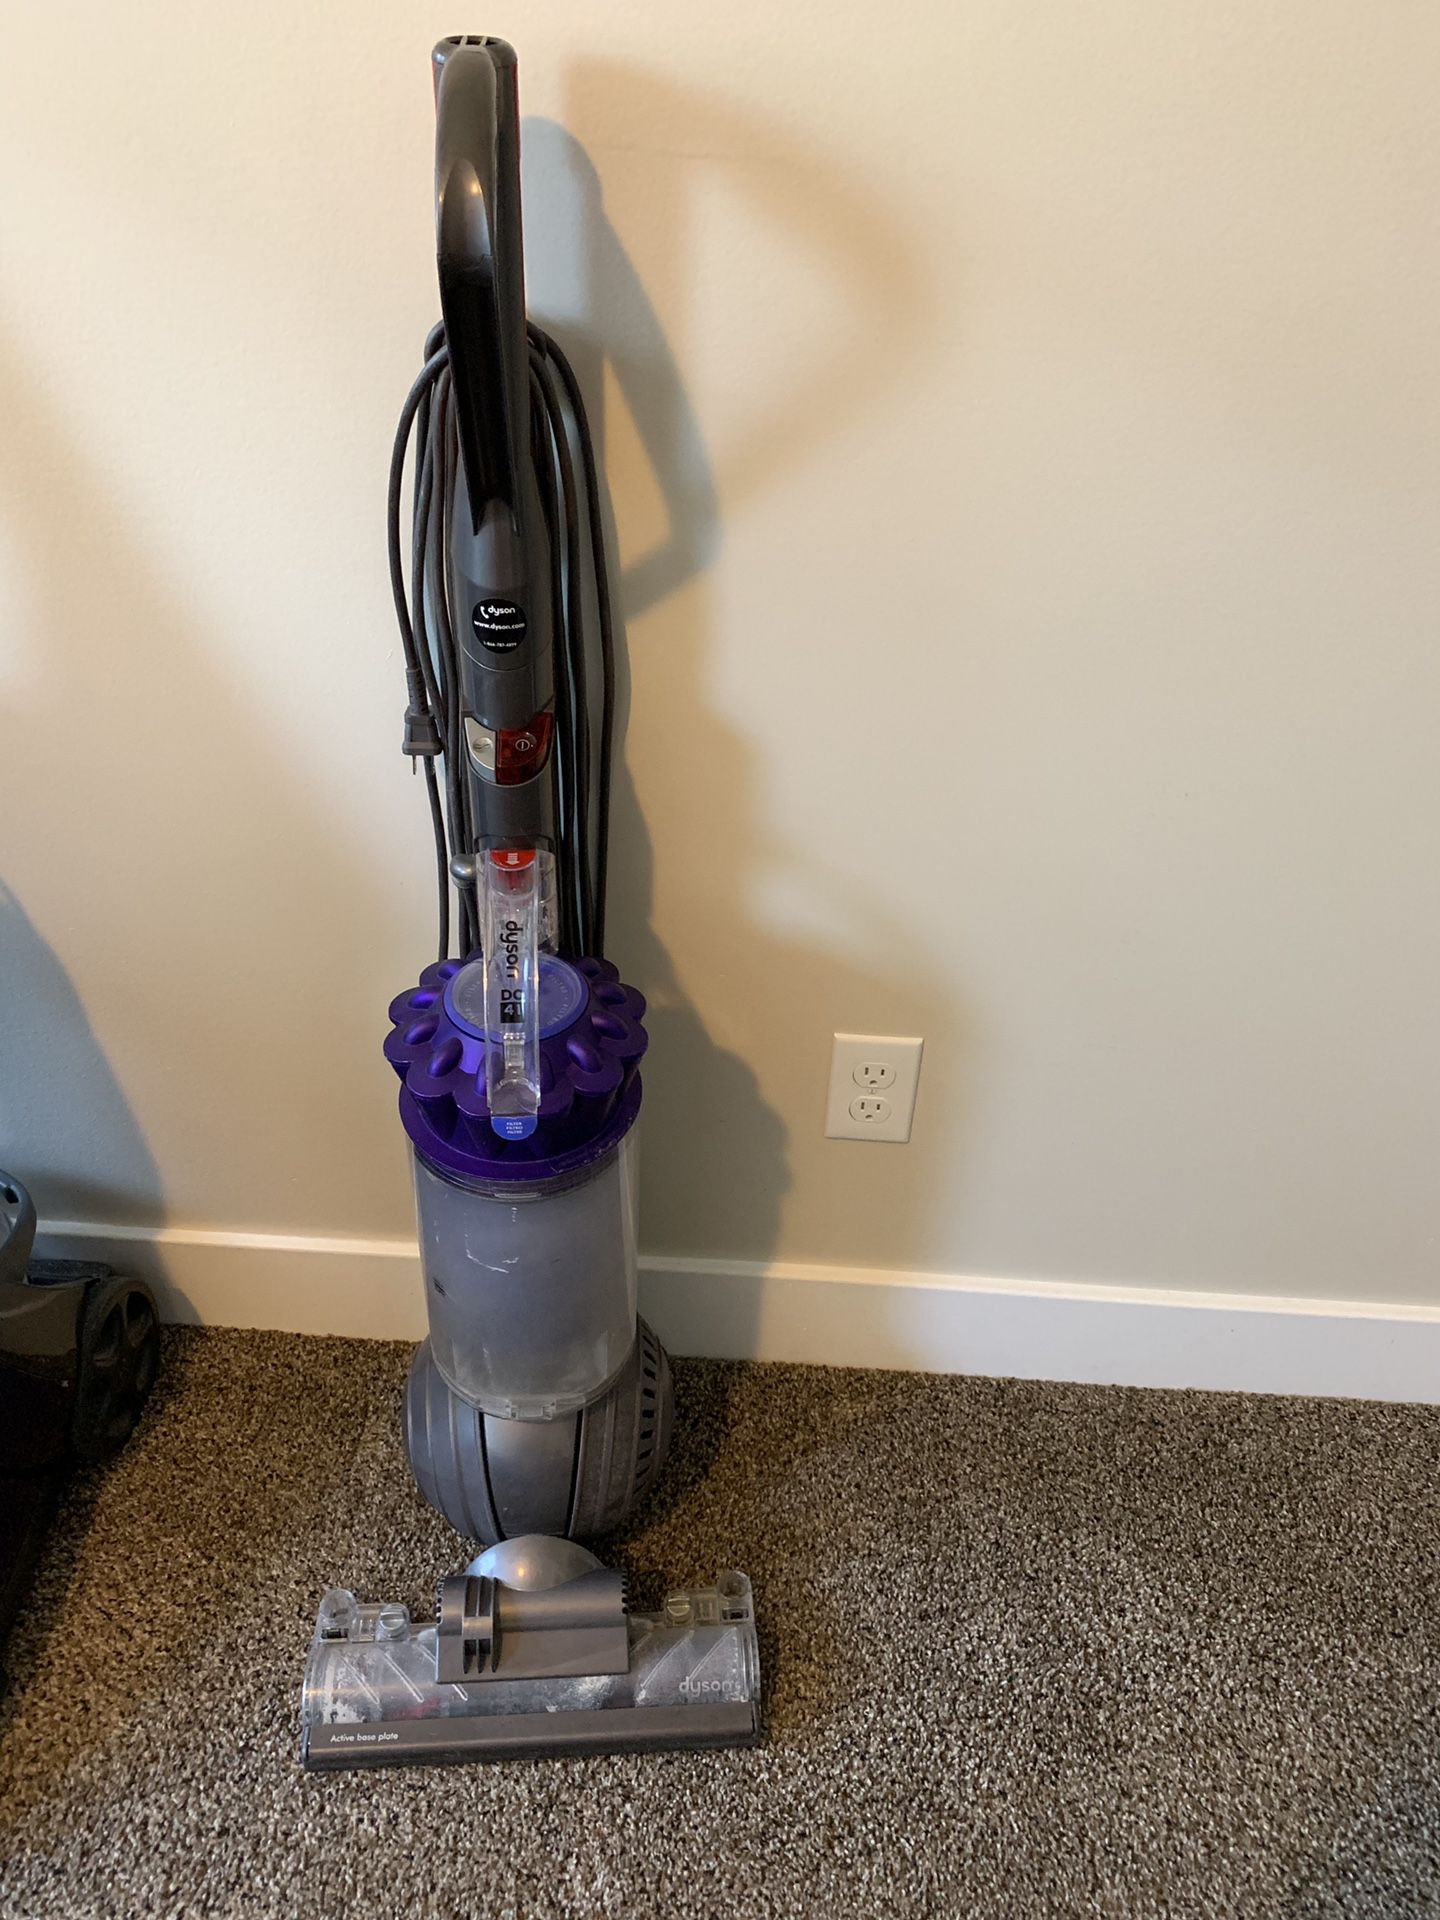 Dyson dc41 or bissell shampooer